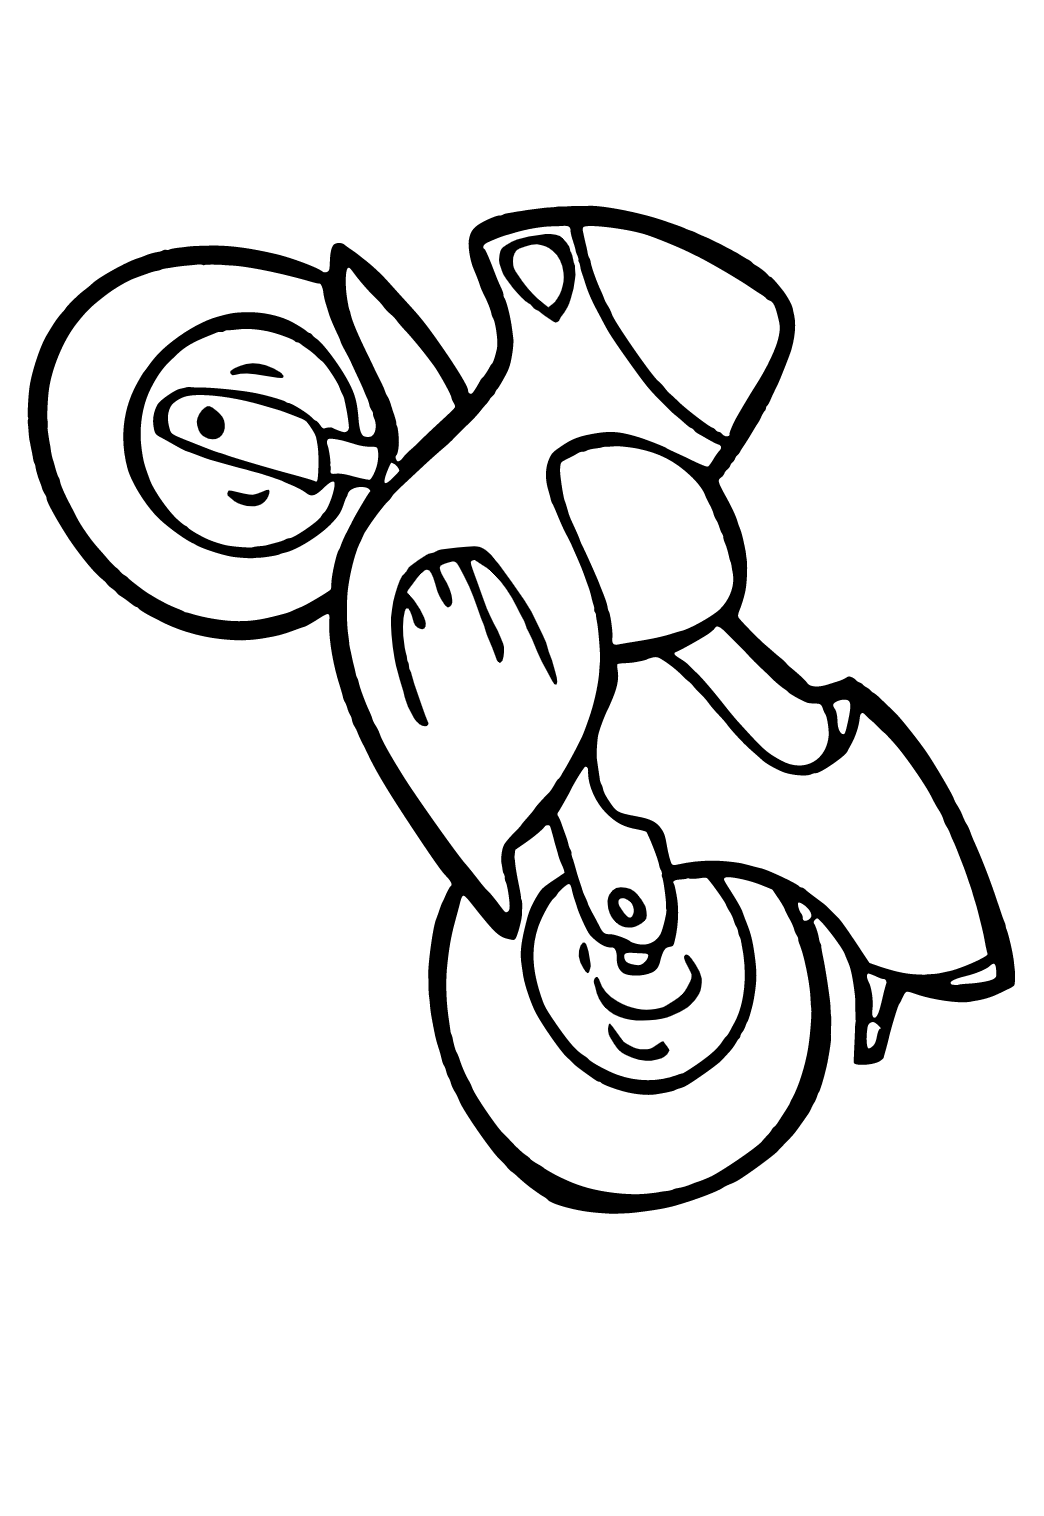 Free printable motorcycle easy coloring page for adults and kids